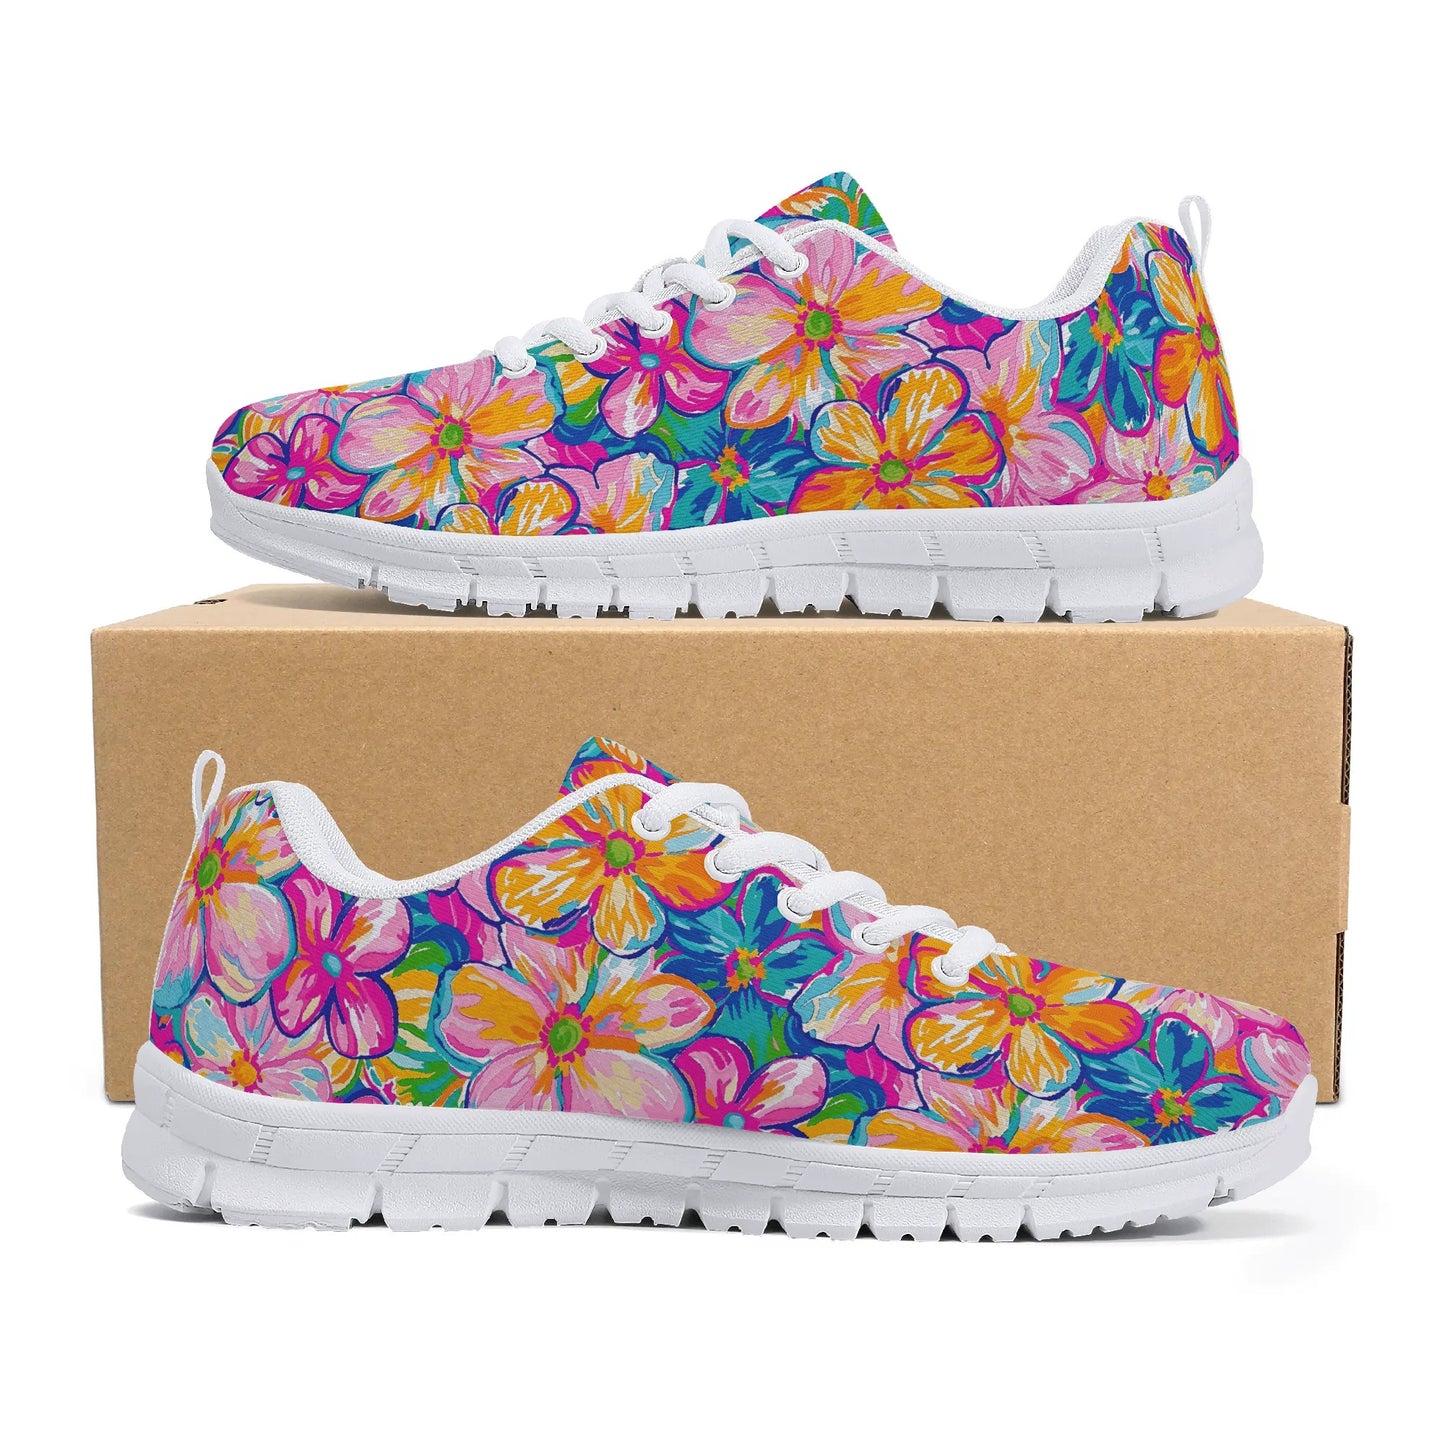 Chromatic Blossoms: Large Watercolor Flowers in Mixed Pinks, Blues, and Oranges Womens EVA Mesh Running Shoes US5-US12